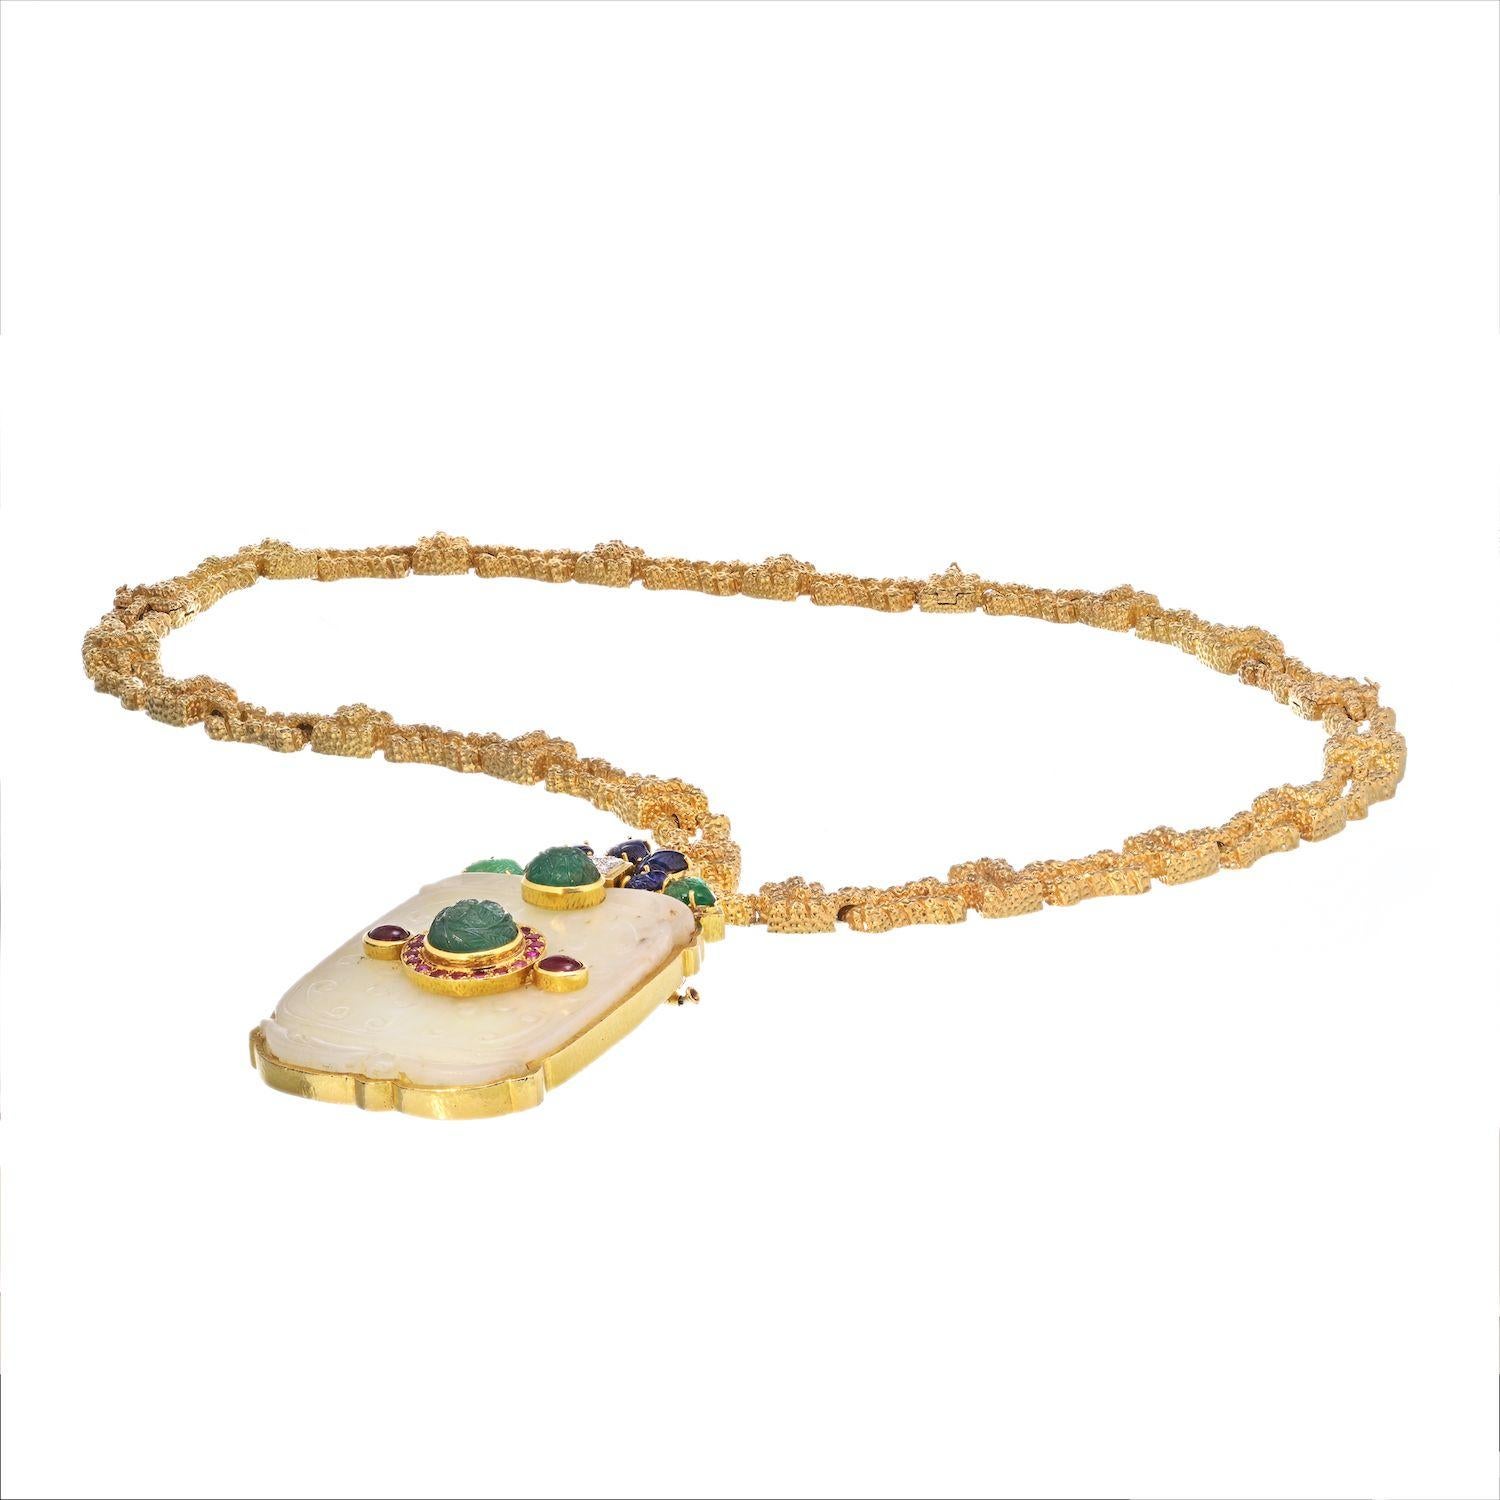 David Webb 18K Yellow Gold Convertable Chain with a French Chinois Jade Necklace.

Exquisite pendant/brooch in 18 karat yellow gold textured chain necklace. Made of 18 karat yellow gold, the pendant features a carved jade accented with a four carved